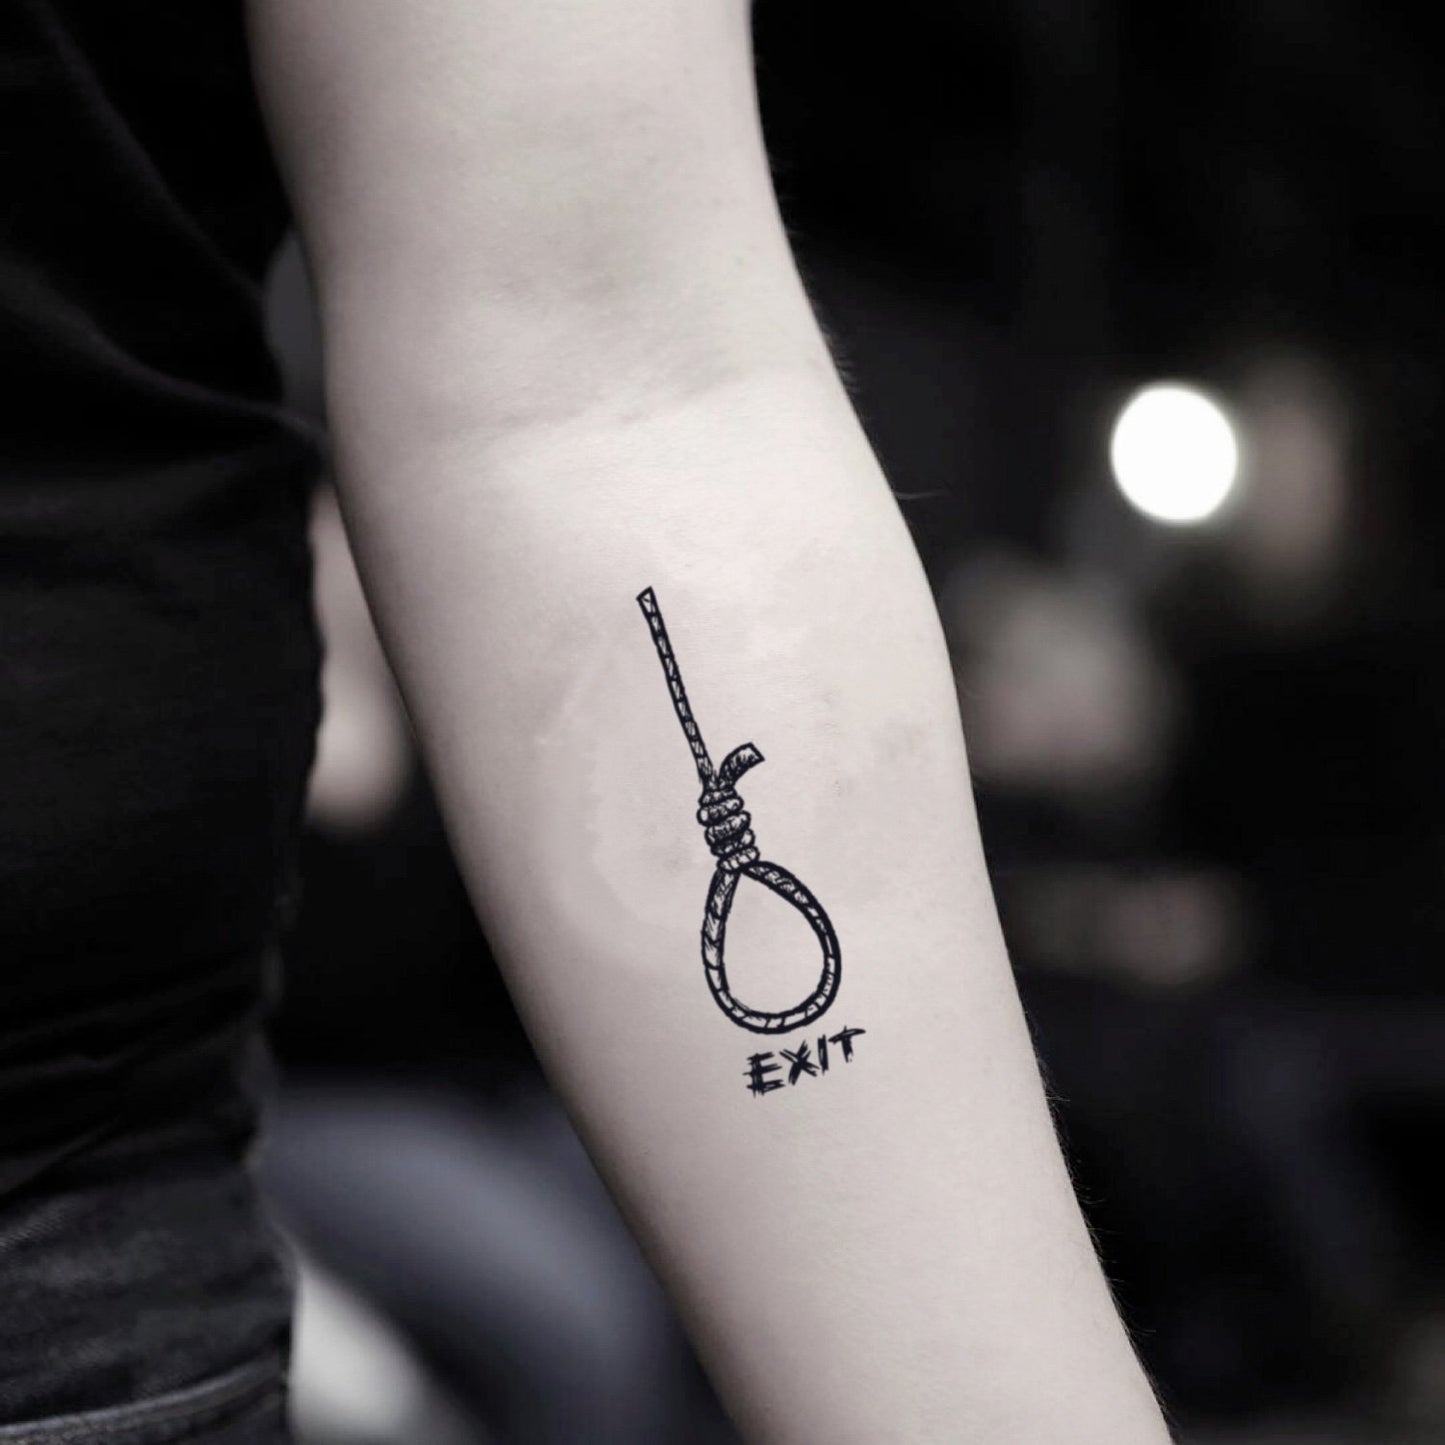 fake small hangman noose hang in there illustrative temporary tattoo sticker design idea on inner arm